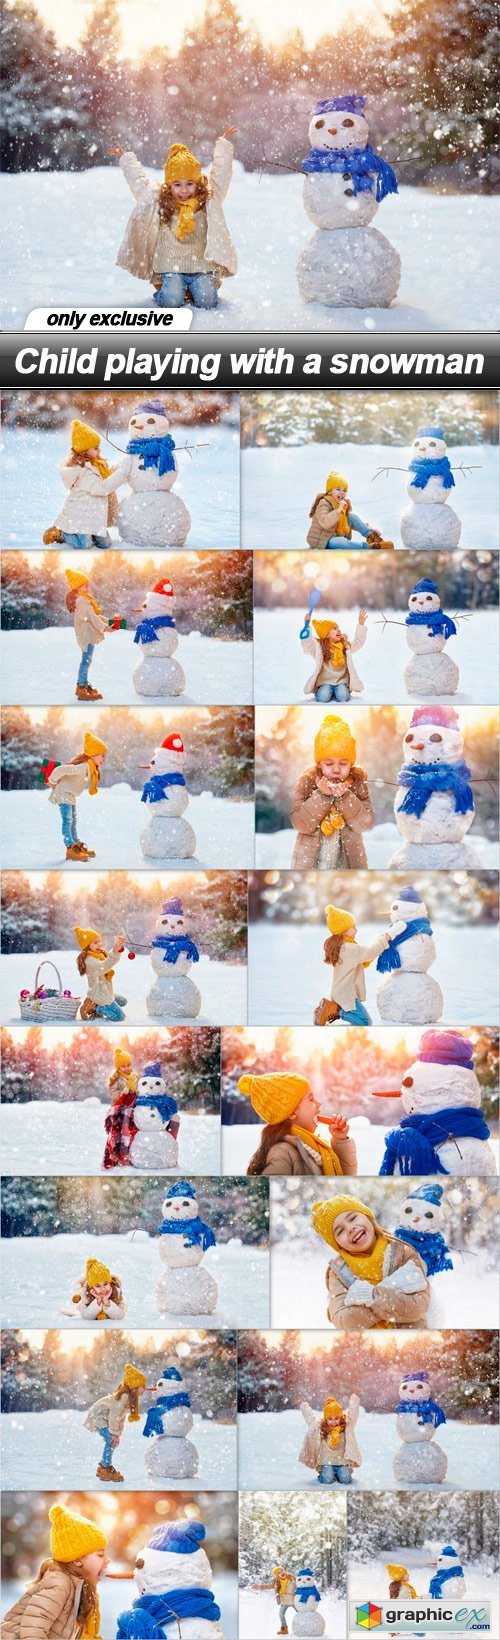 Child playing with a snowman - 17 UHQ JPEG